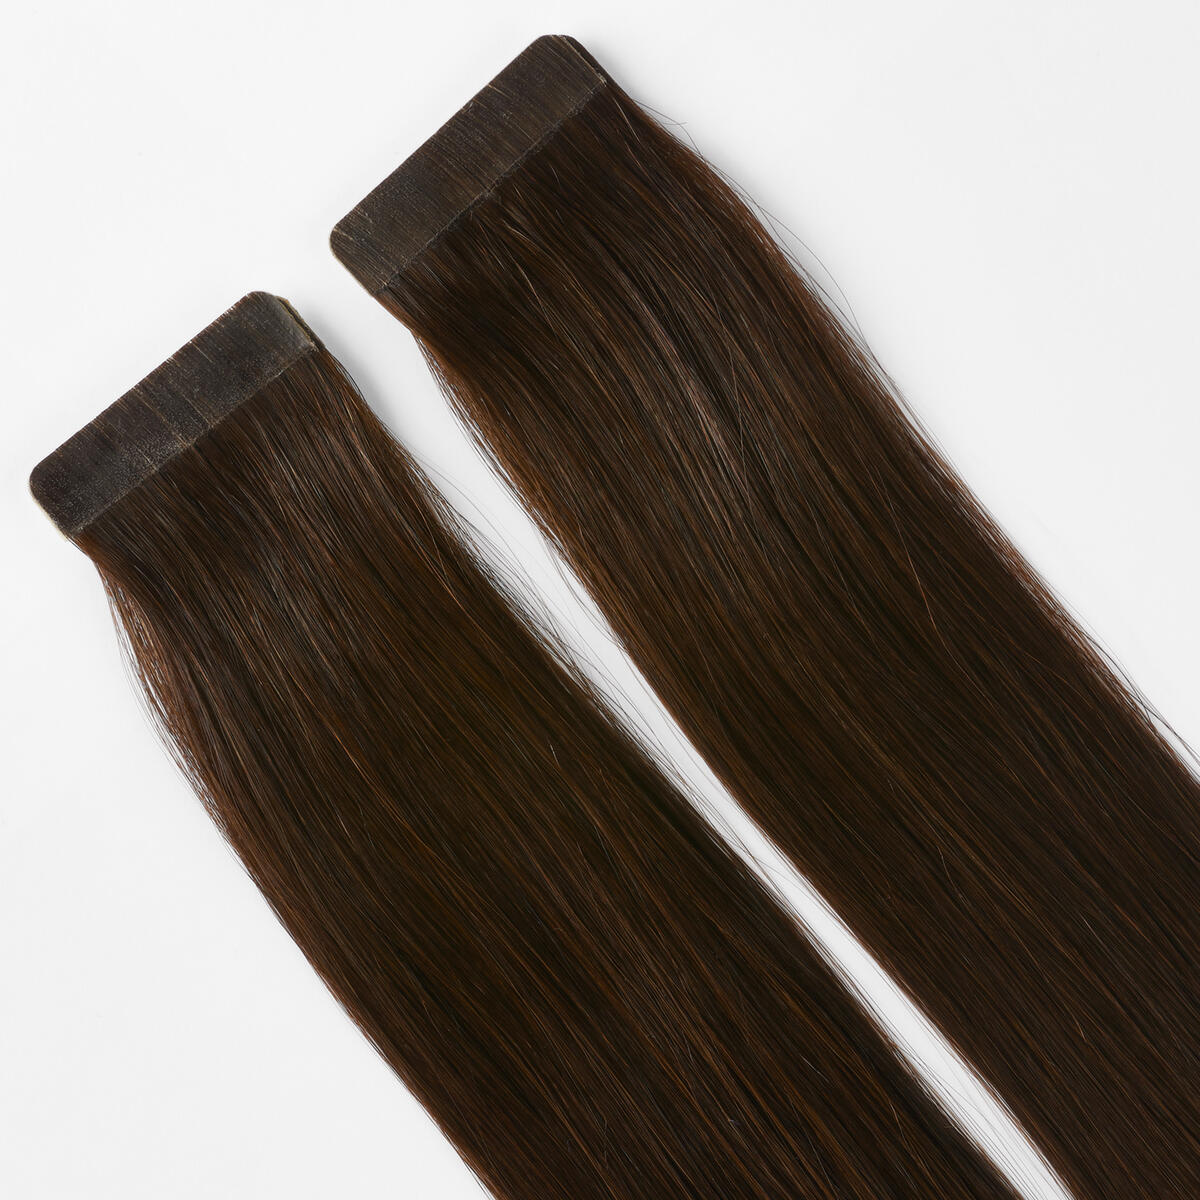 Basic Tape Extensions Classic 4 2.3 Chocolate Brown 30 cm